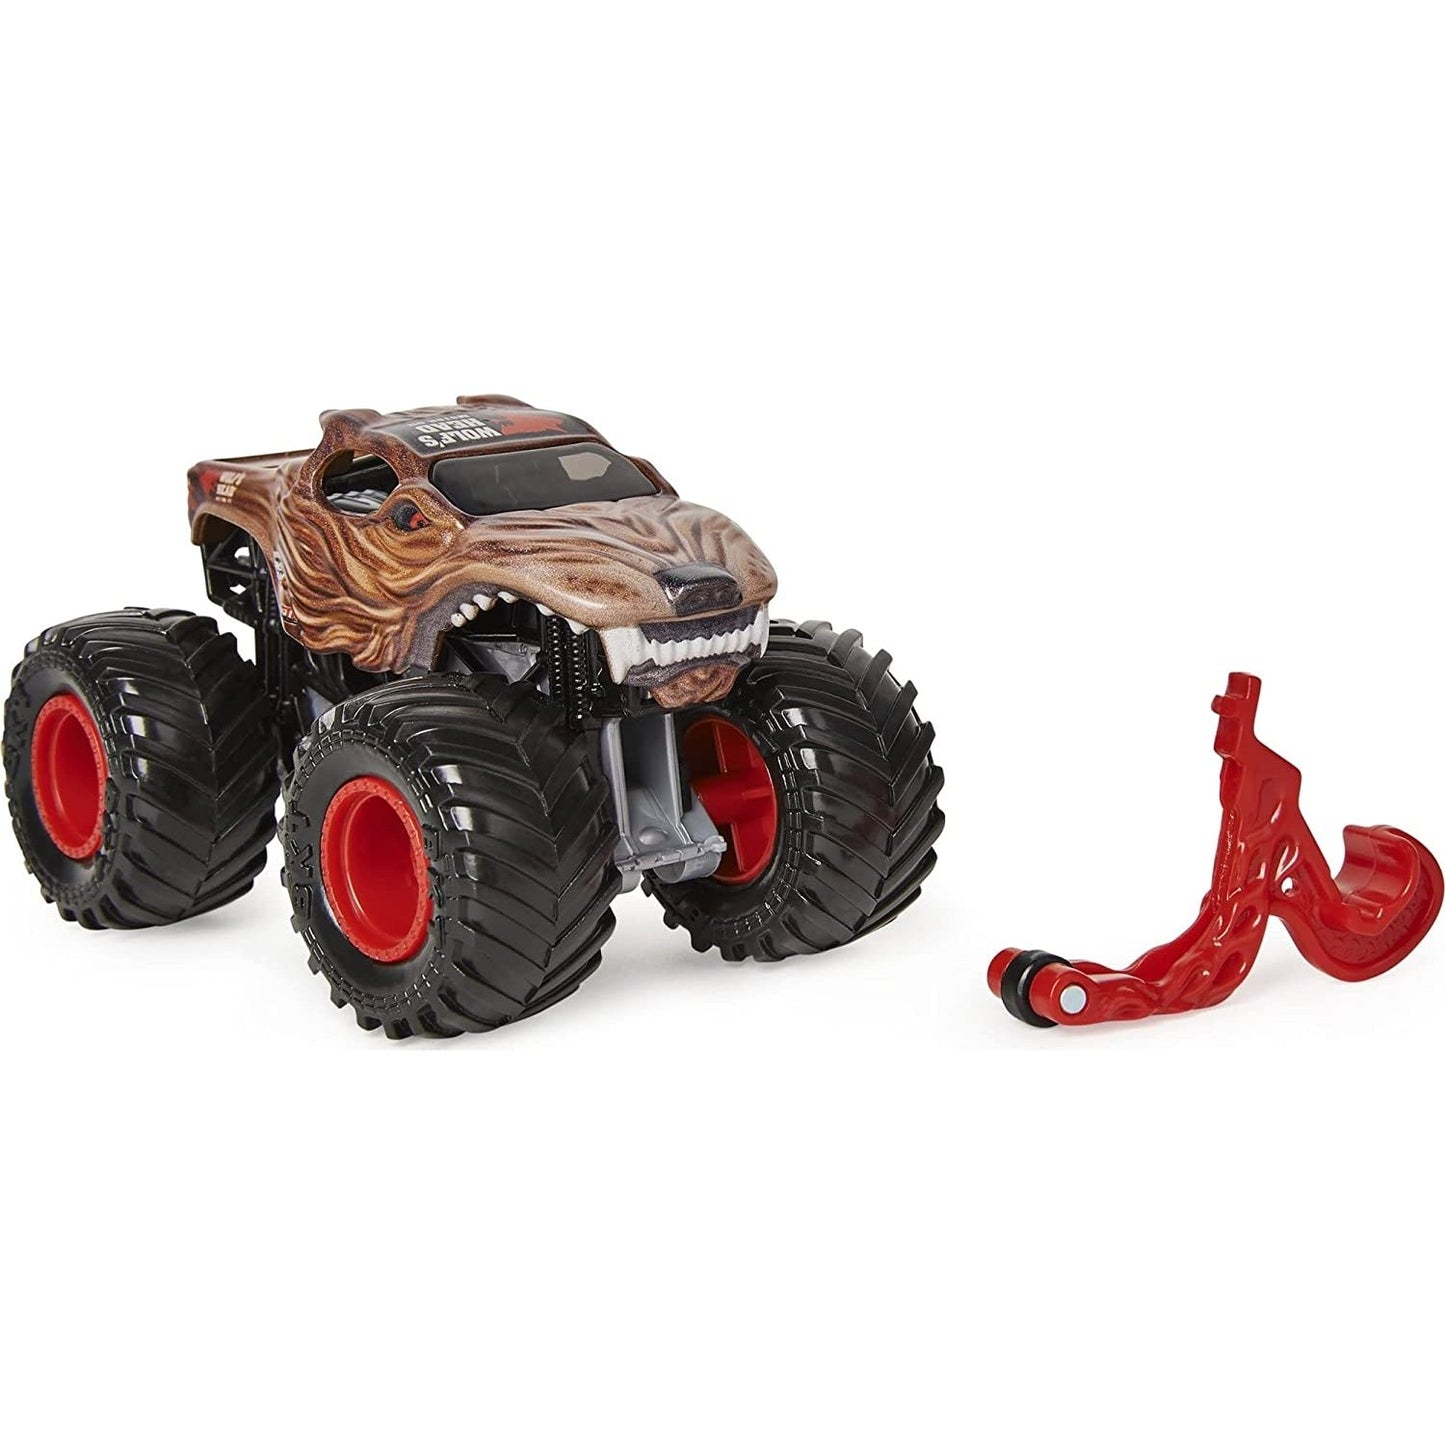 Monster Jam 2021 Spin Master 1:64 Diecast Monster Truck with Wheelie Bar: Arena Favorites Wolf's Head from 2P Gaming